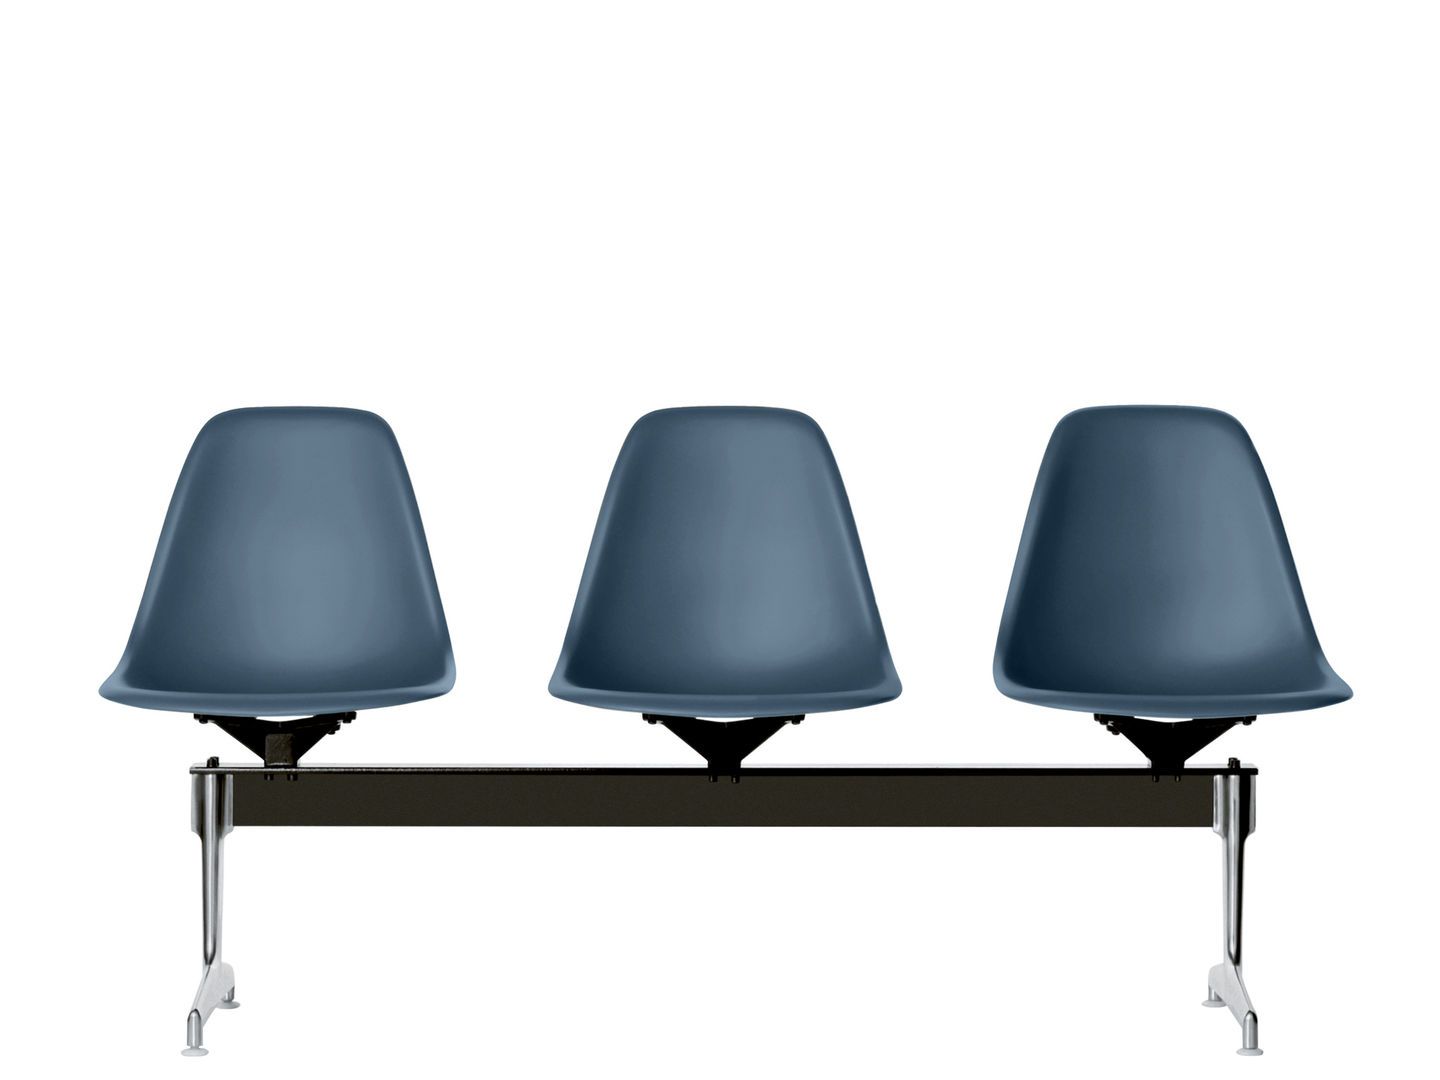 Eames Plastic Side Chair beam seating | One52 Furniture 